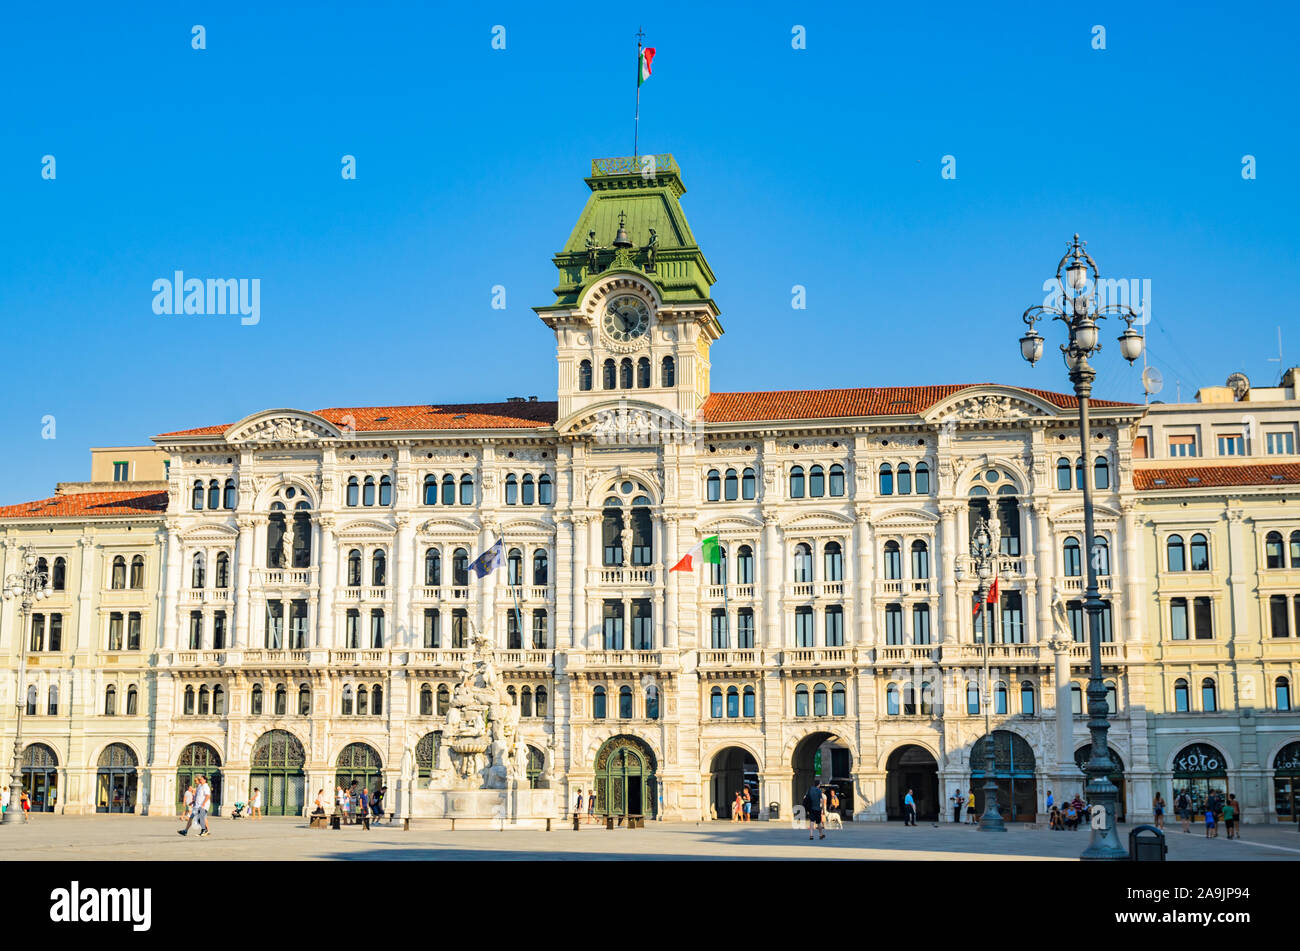 Trieste, Italy - March 19, 2018 : View of trieste City Hall building Stock Photo